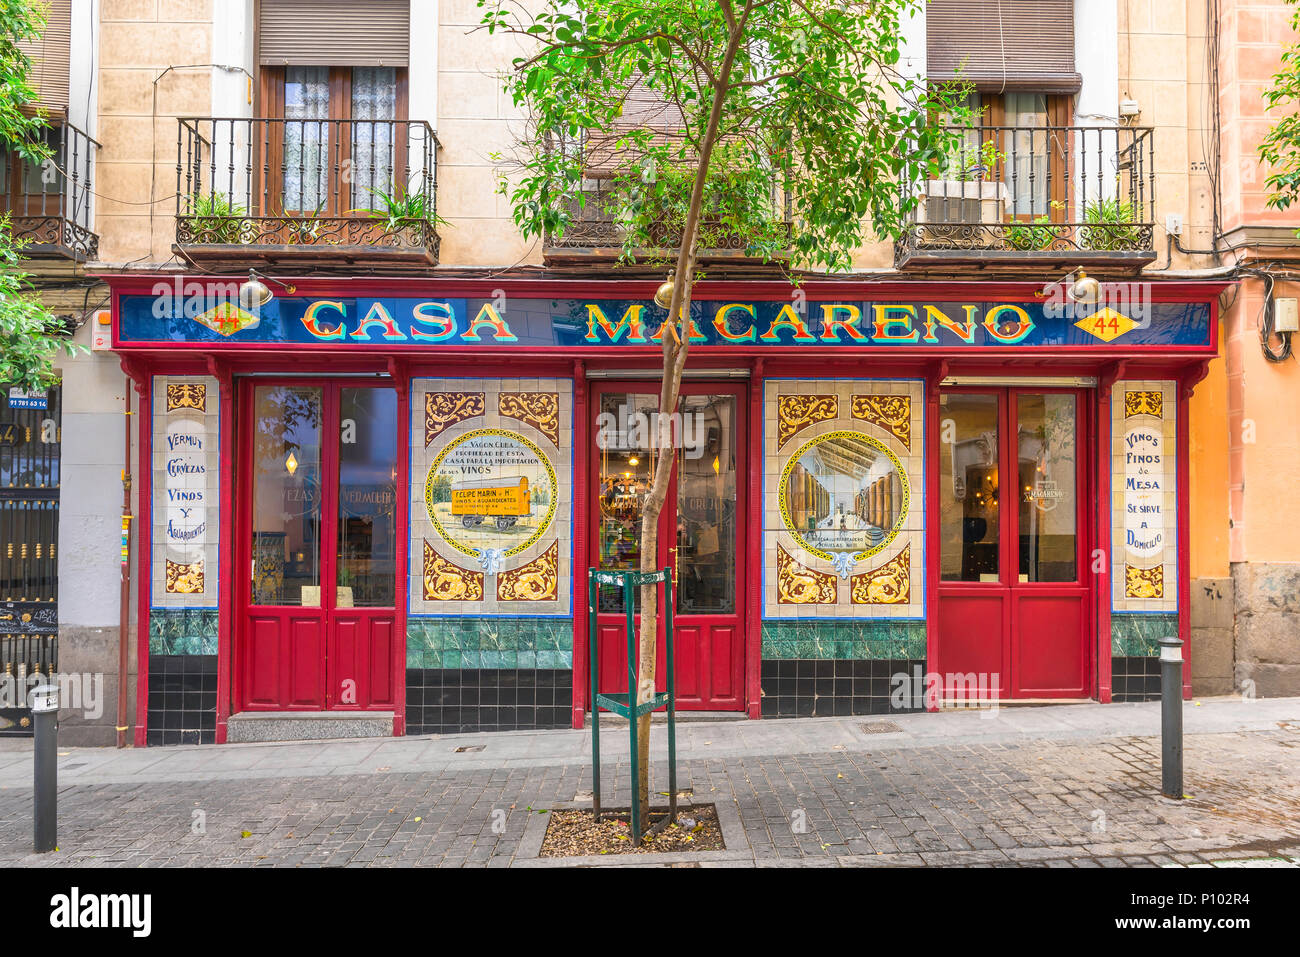 Madrid bar, view of the colourful front of a bar in the historic Malasana area of Madrid, Spain. Stock Photo